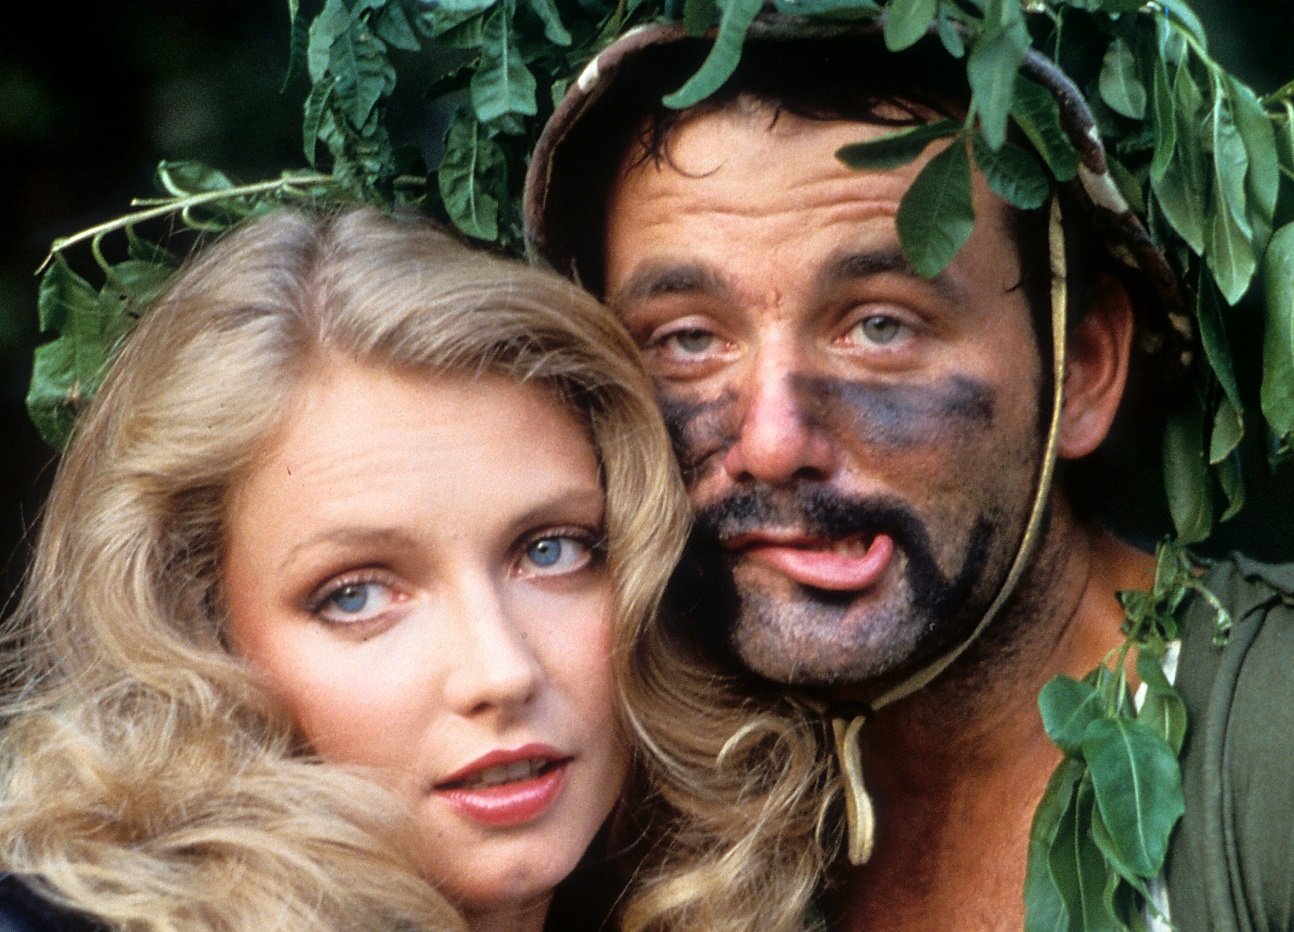 Cindy Morgan and Bill Murray with black paint smeared on his face; the two actors stand with their faces close together under a tree